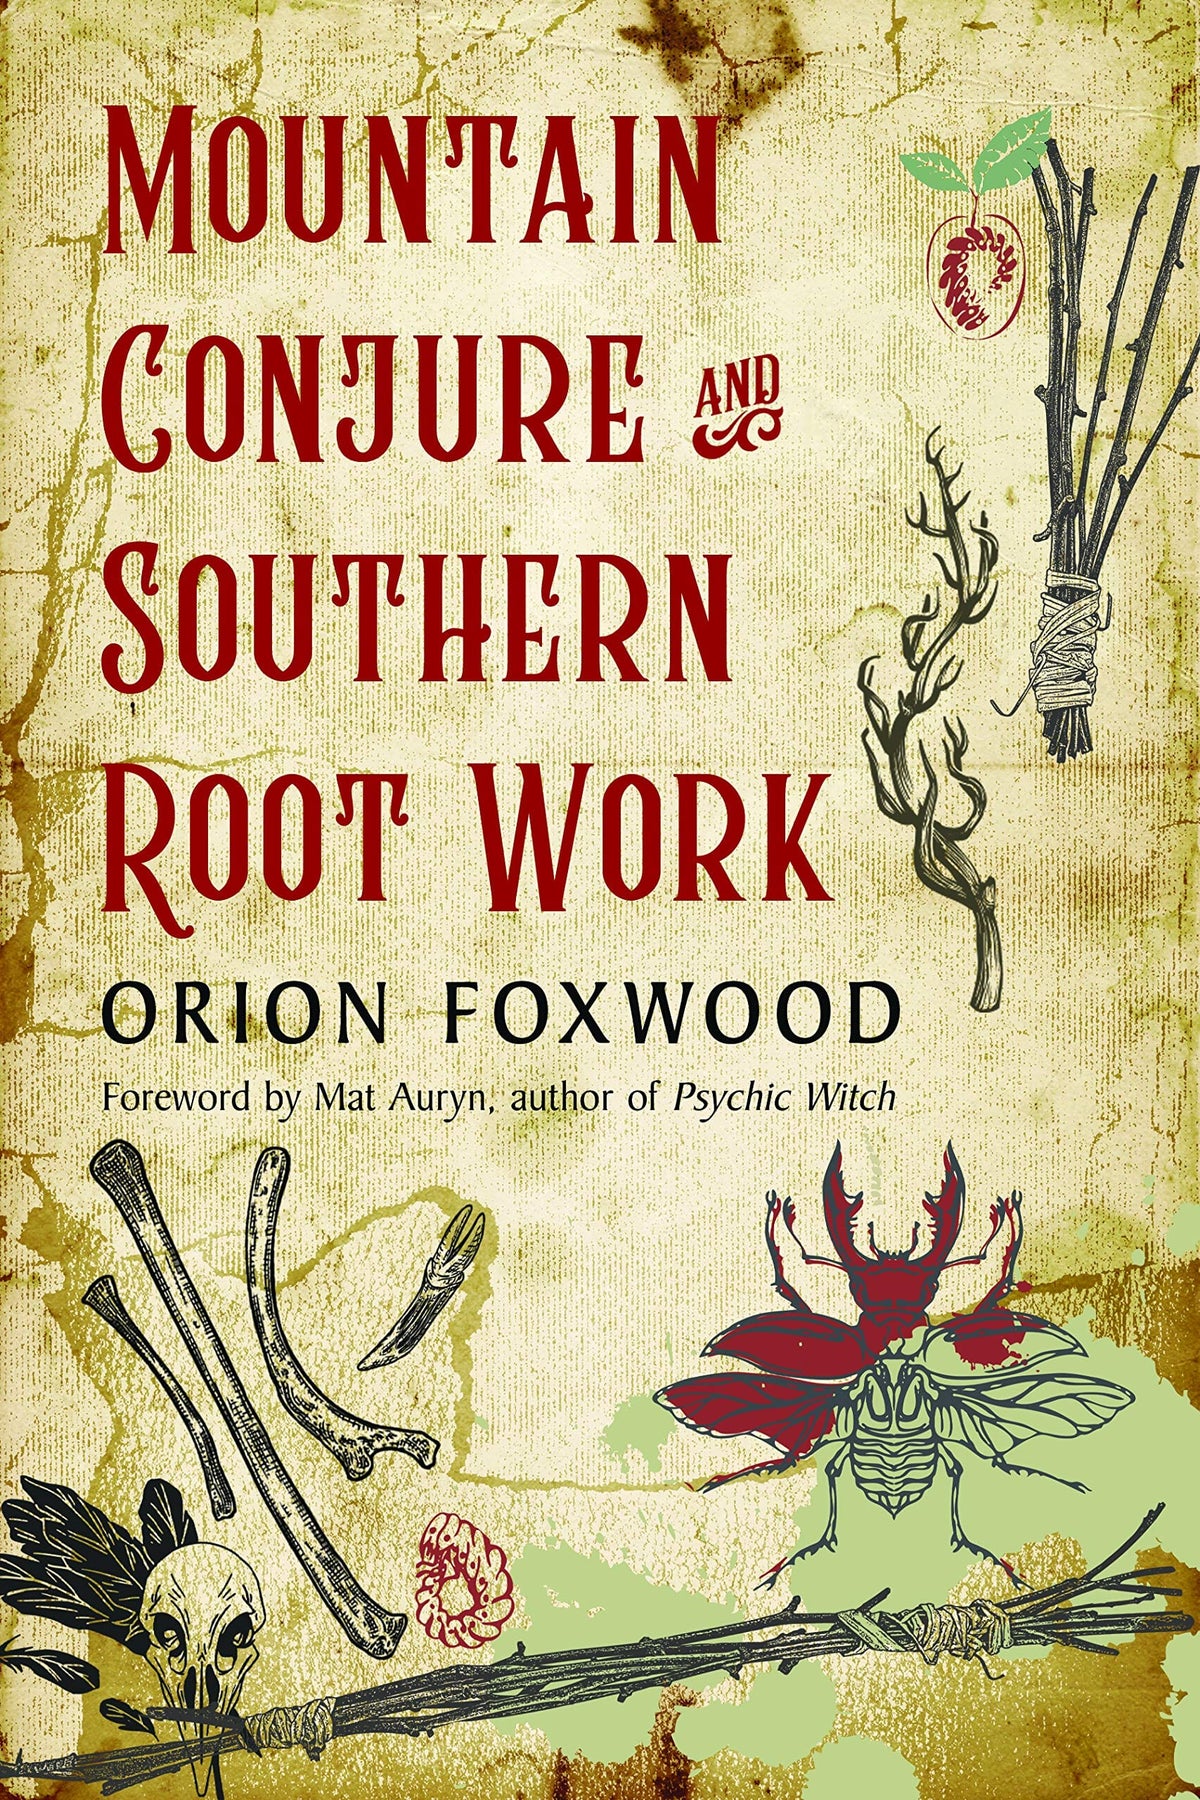 Mountain Conjure and Southern Root Work - Third Eye